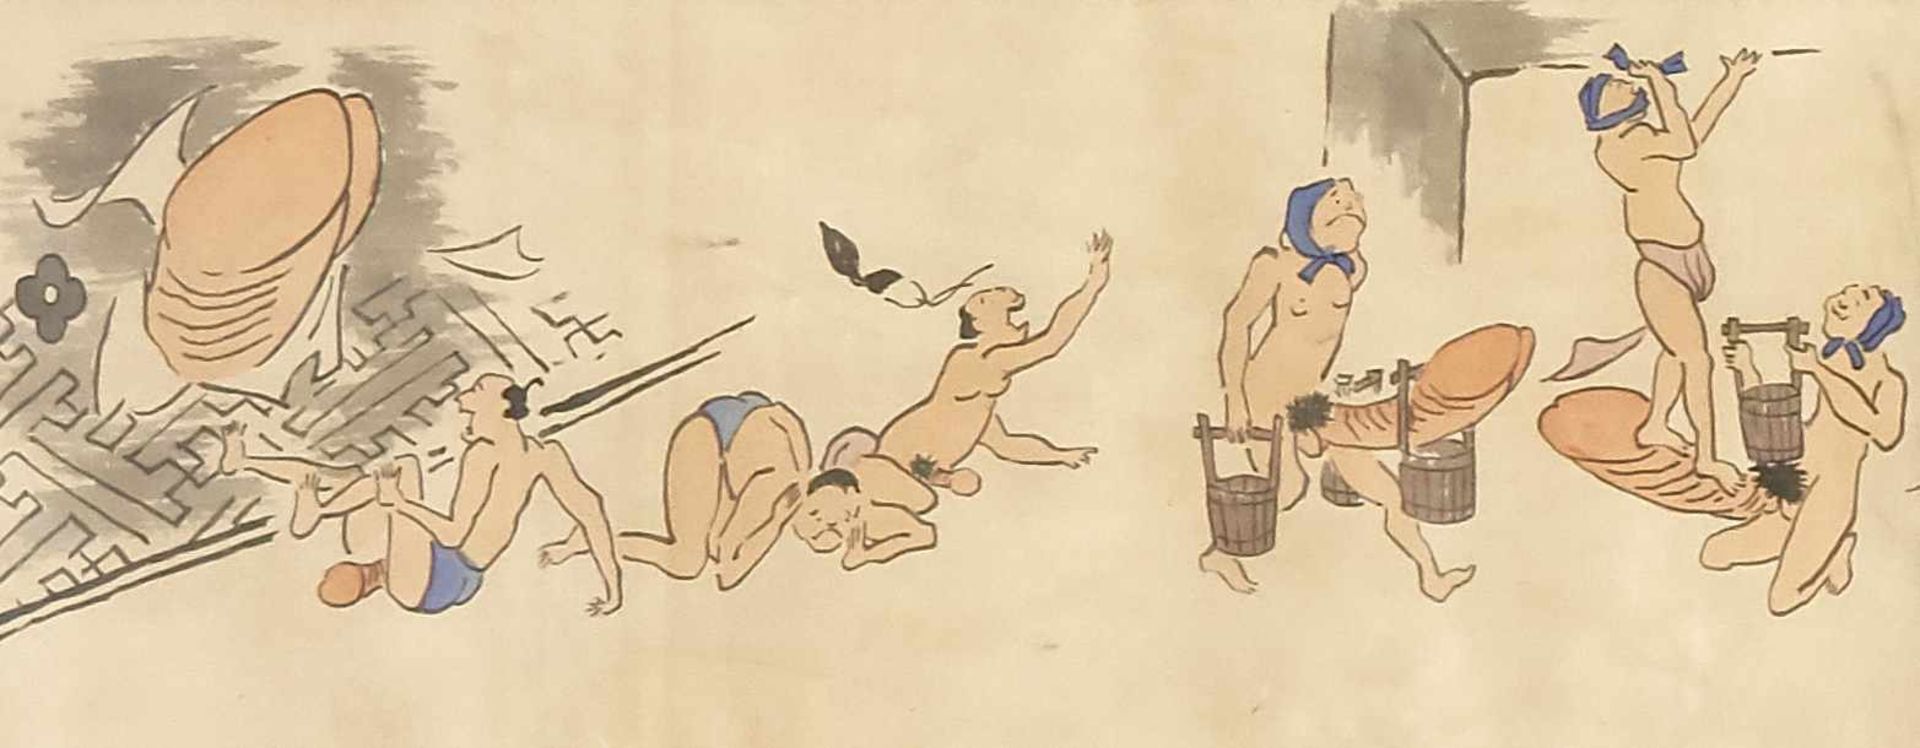 Scroll painting by Gyu Sai Kawanabe, mocking pictures of the strength of the man, Japan,